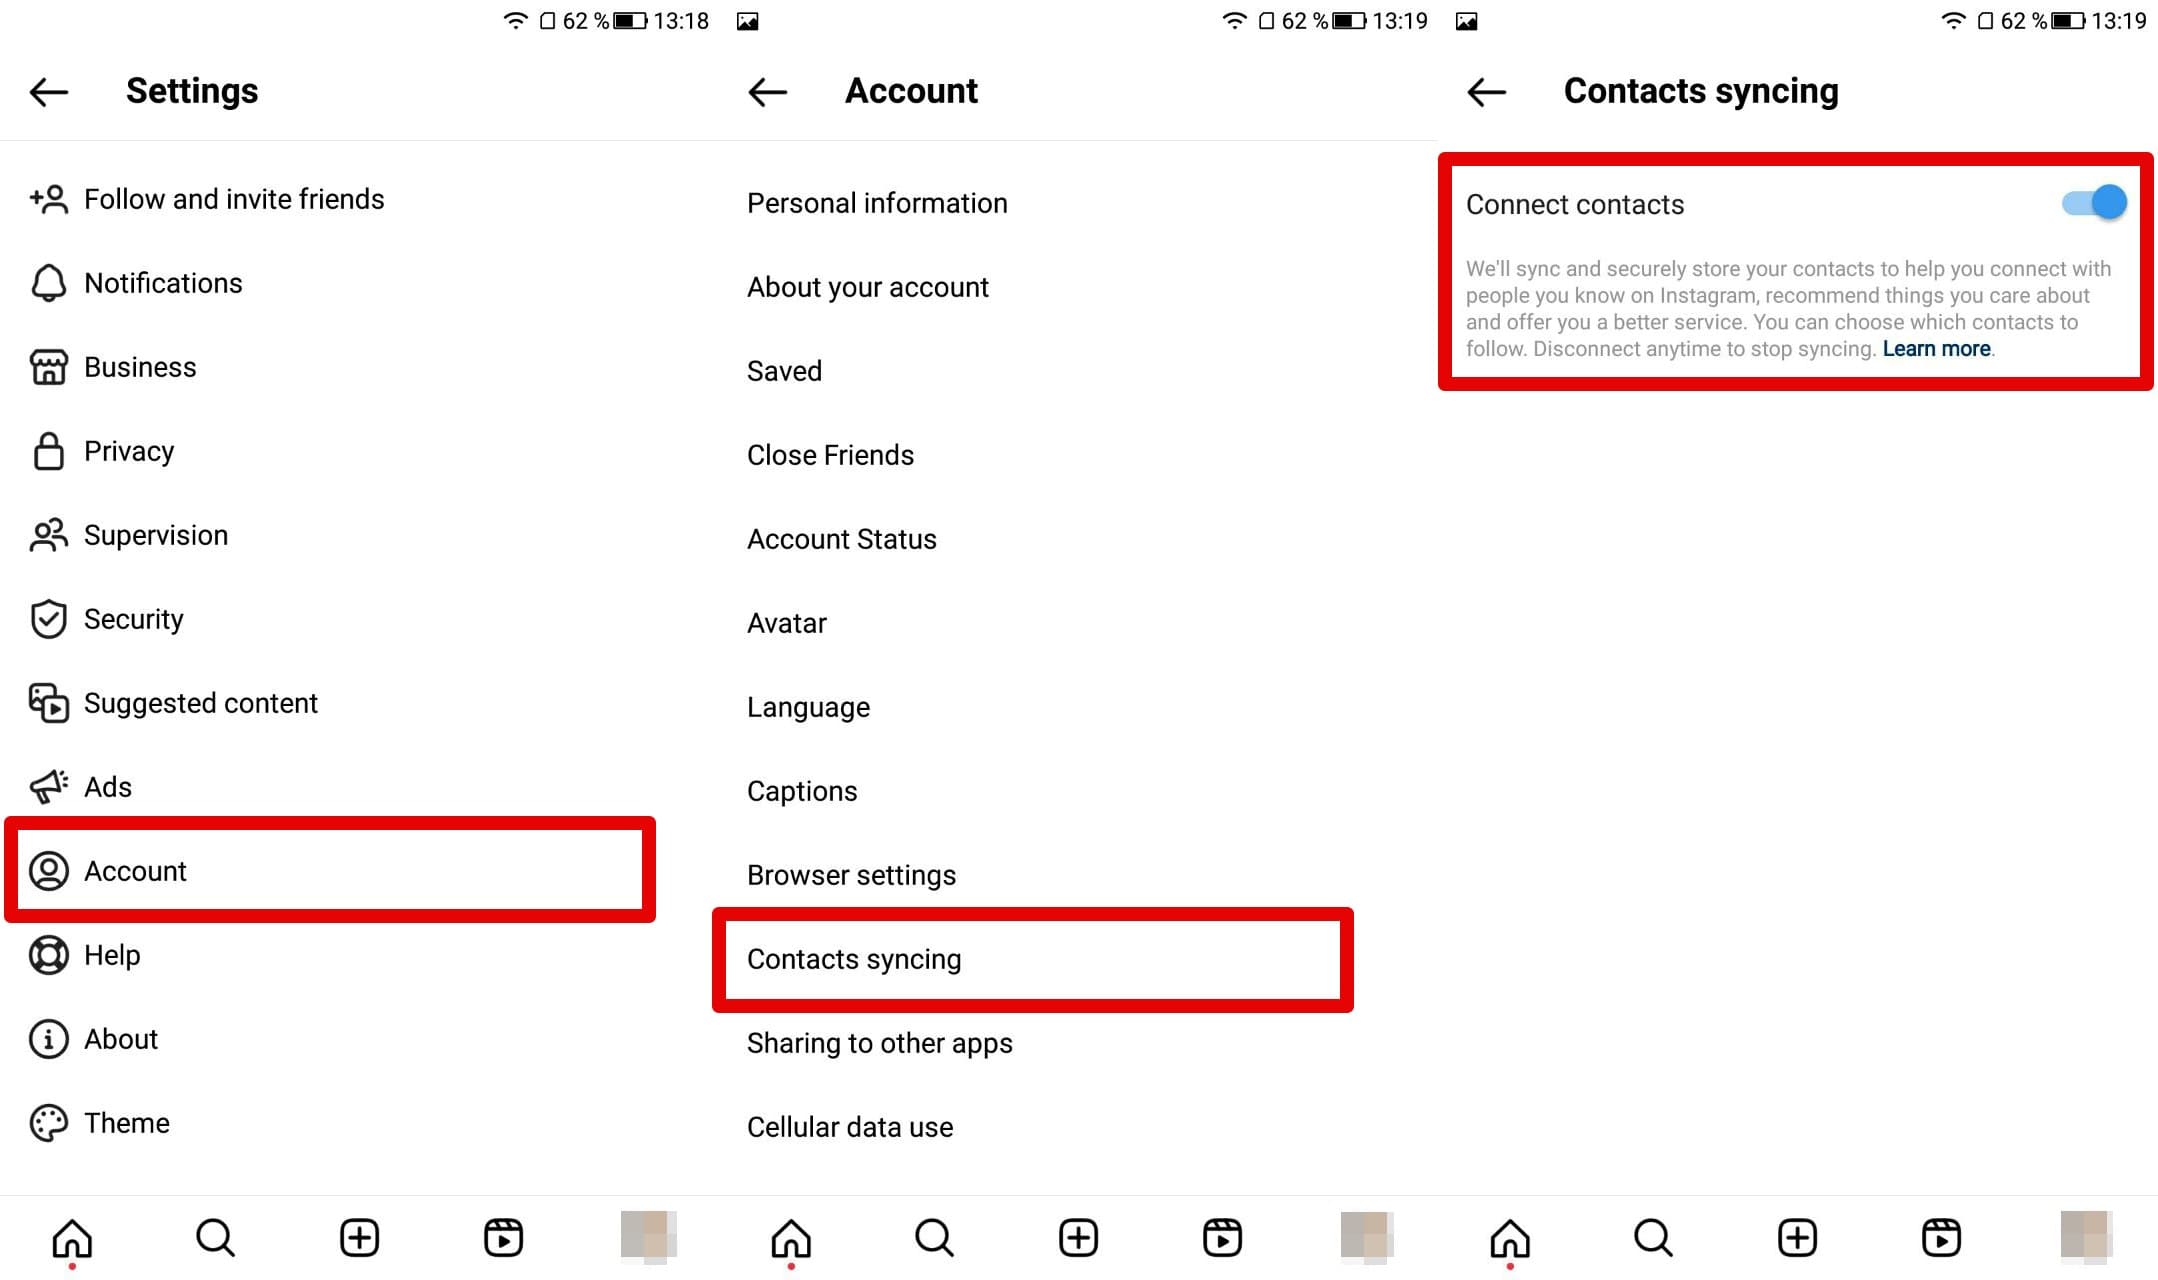 An image of how to sync contacts on Instagram